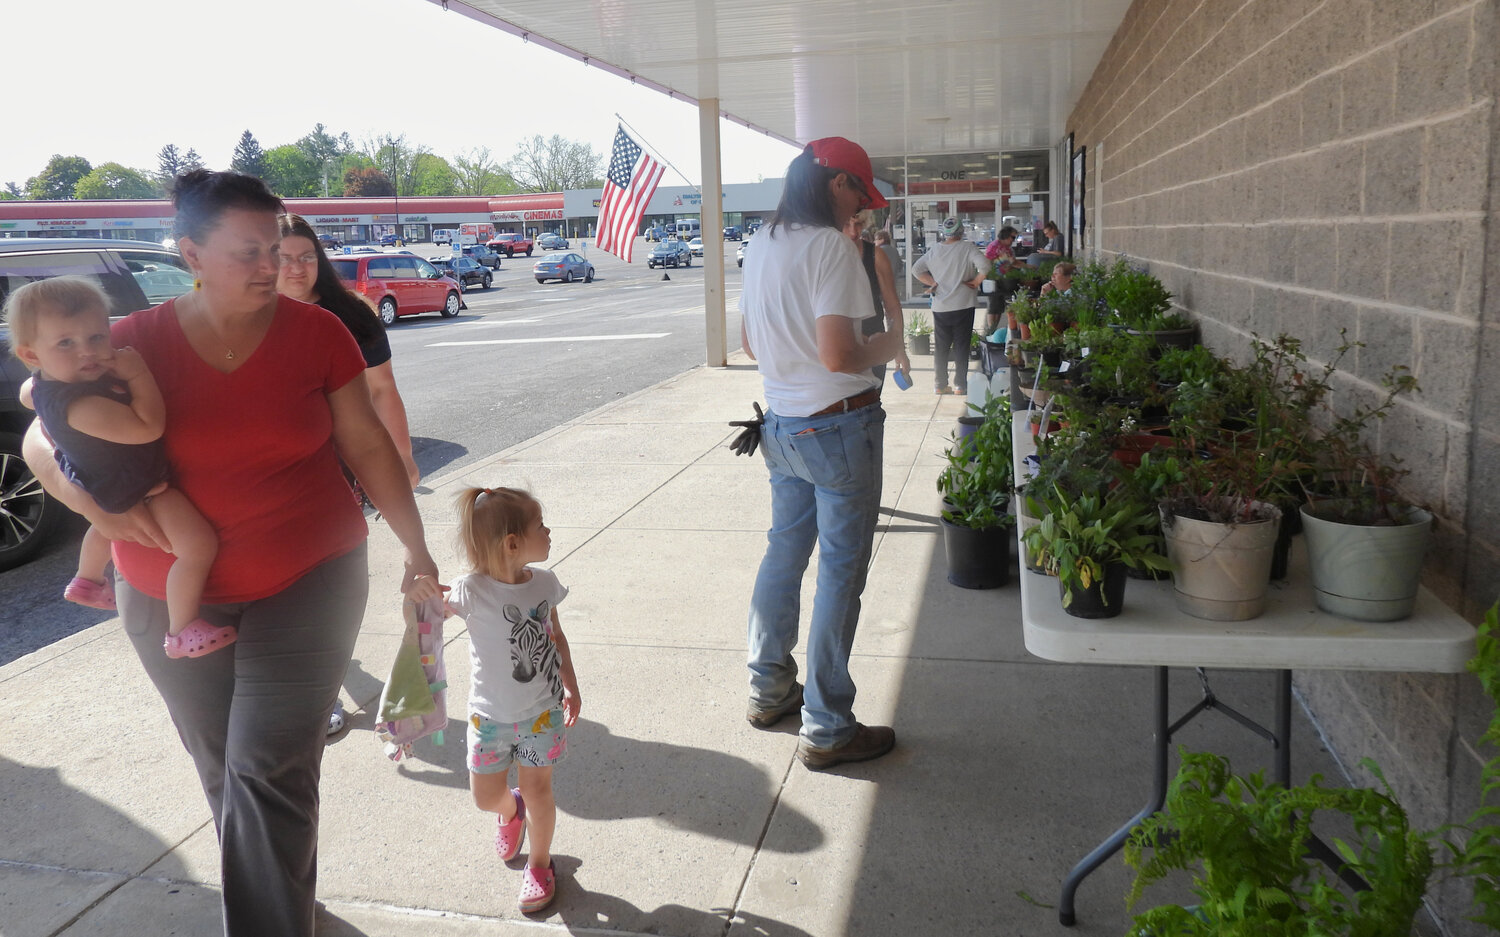 The Green Thumb Garden Club of Oneida Castle held its spring plant sale on Friday, May 12 at Eclectic Chic in Oneida.